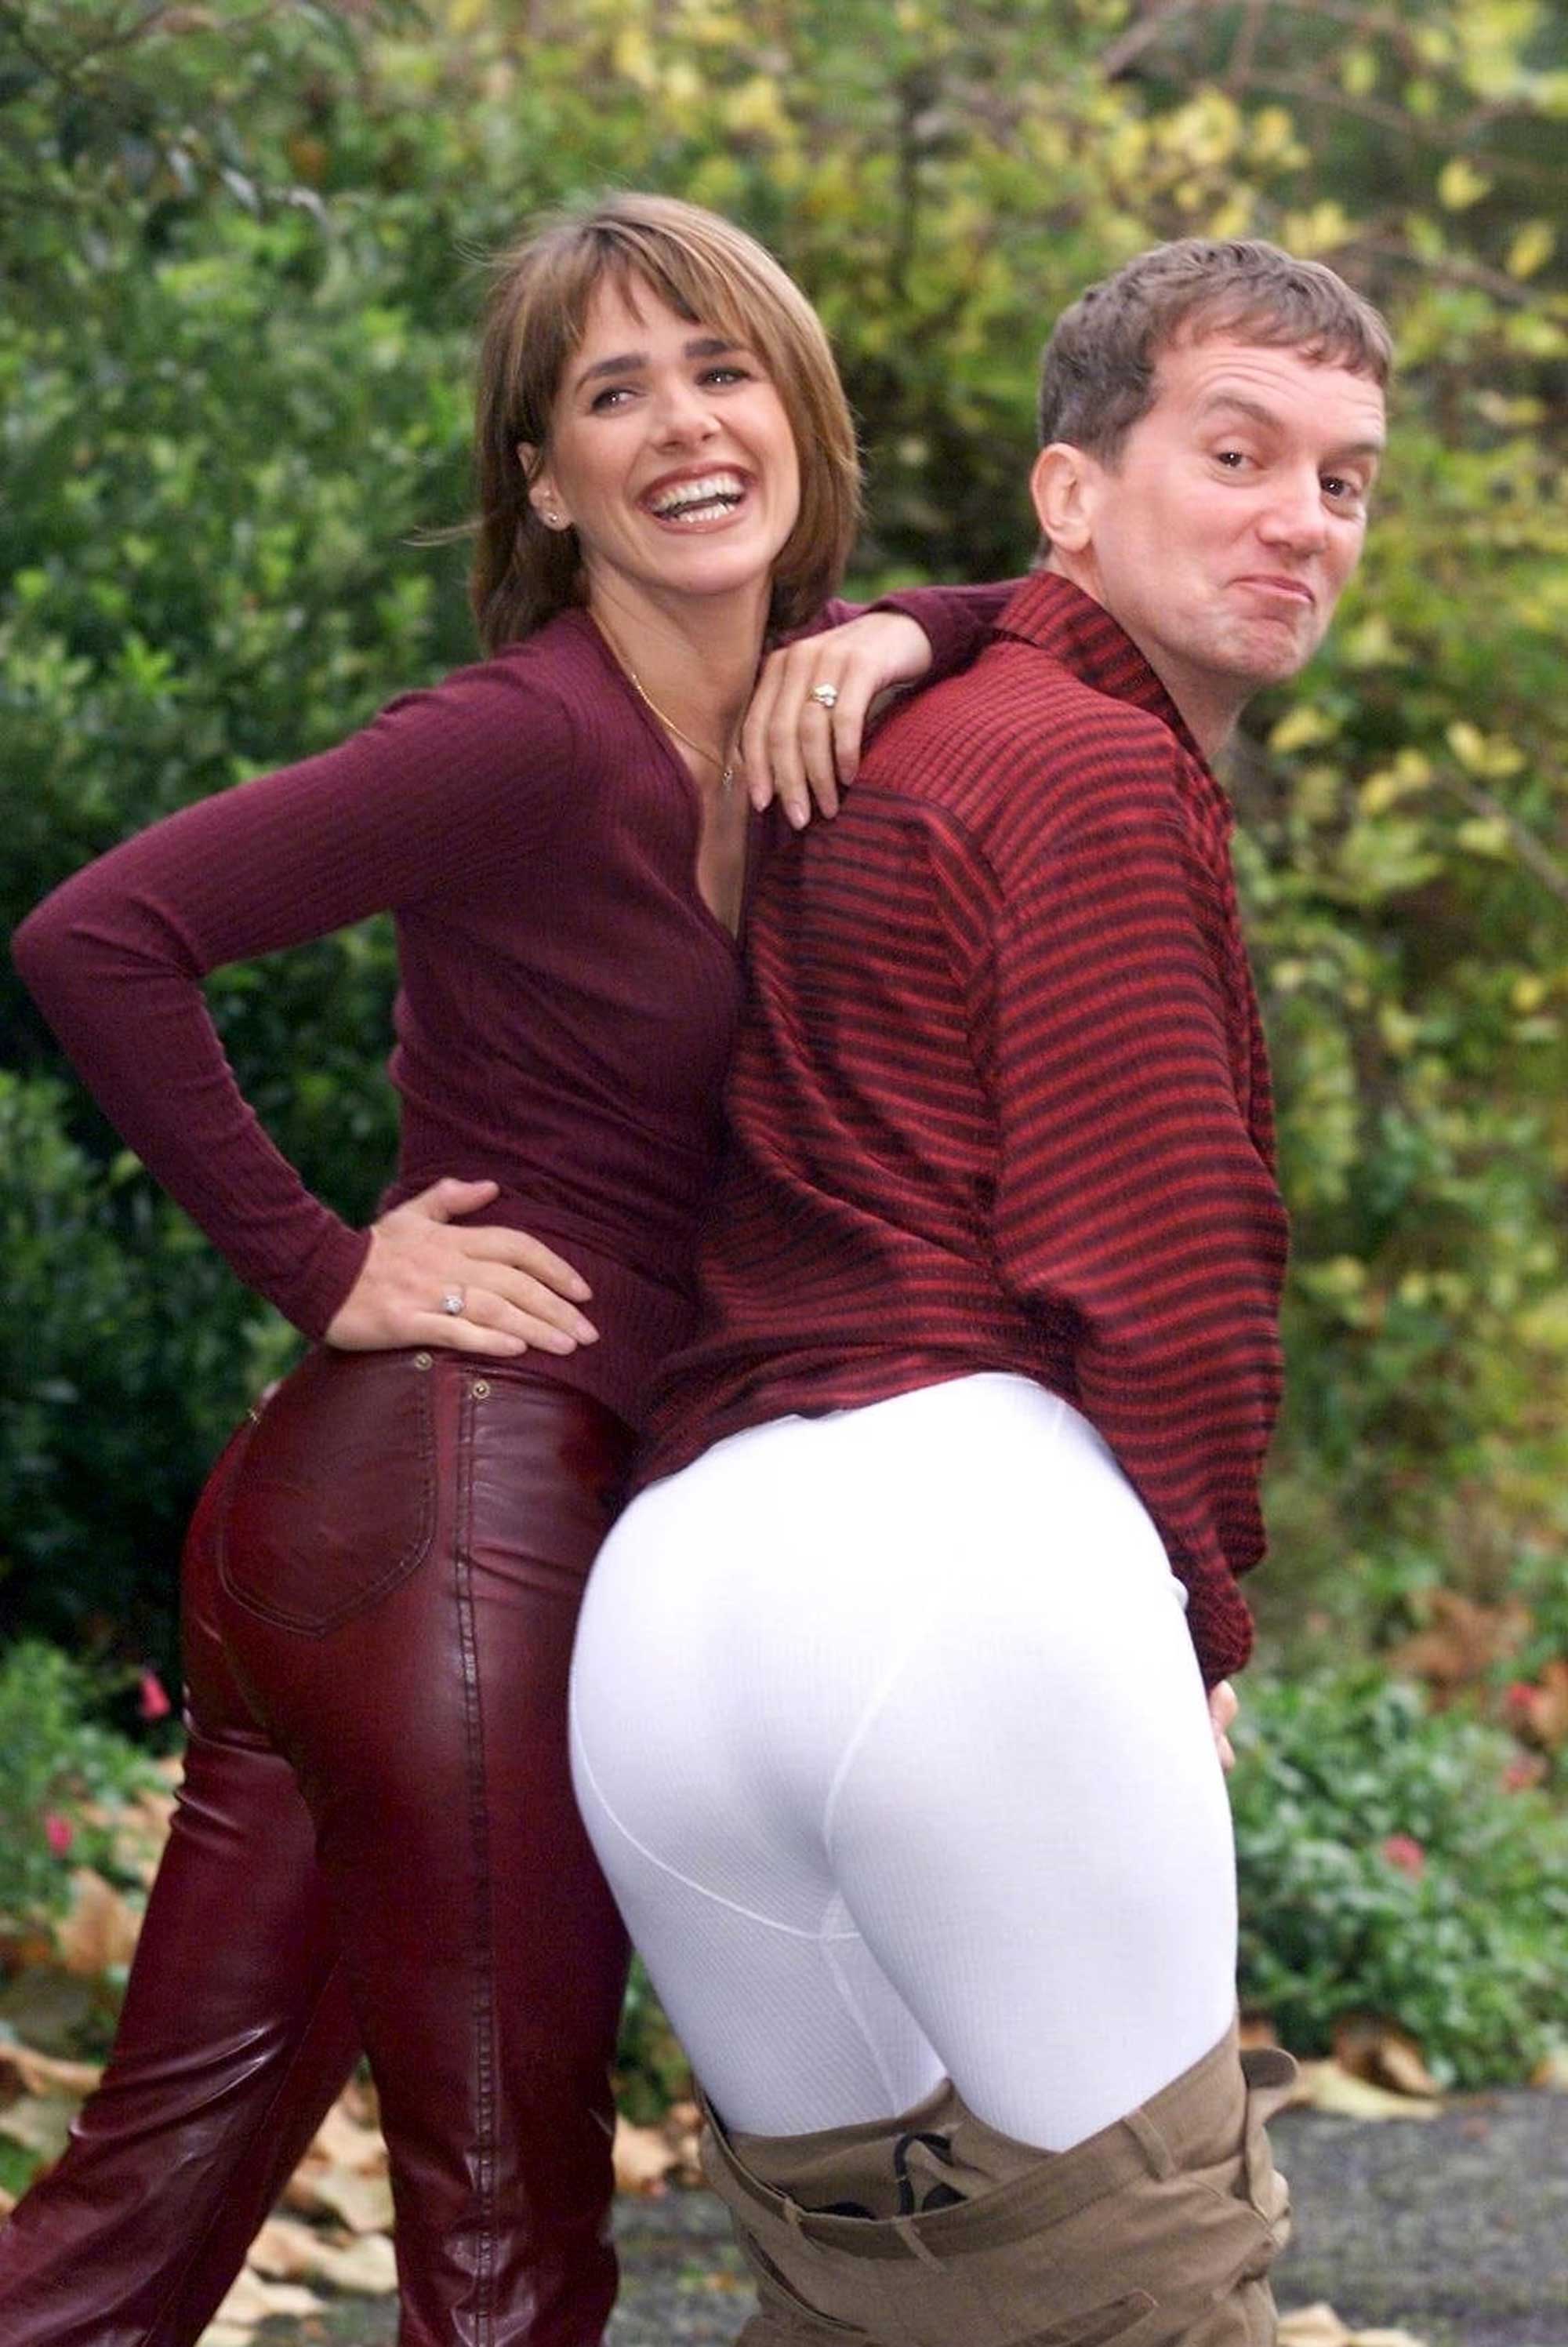 Carol Smillie Rear of the year 1998